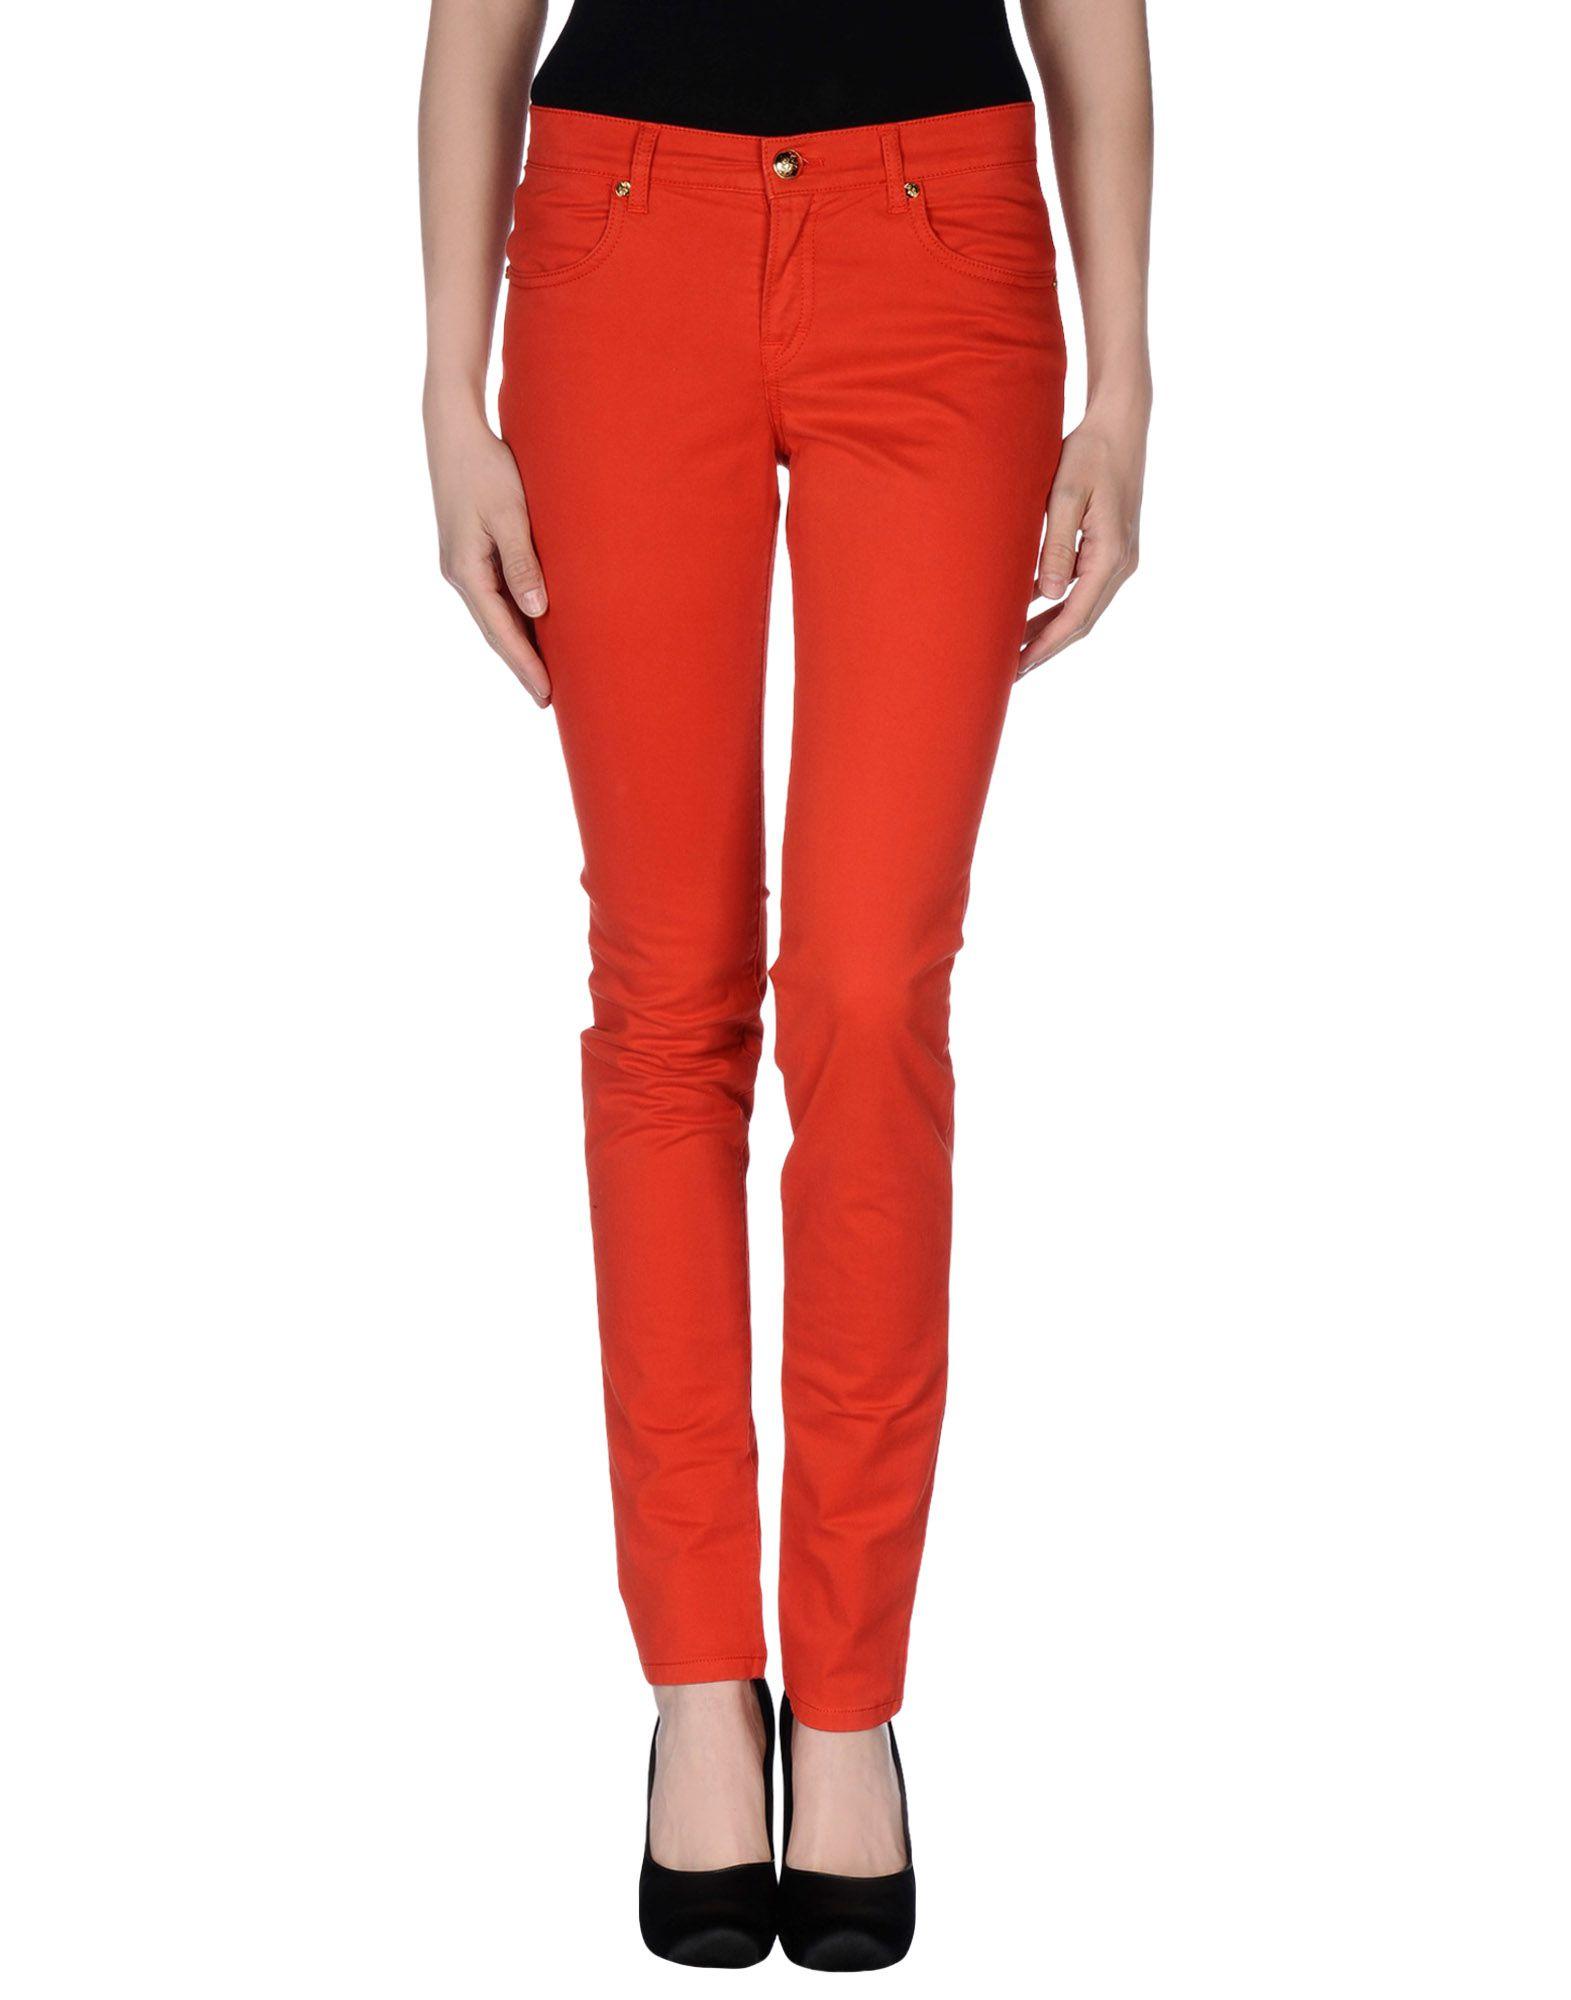 Emilio Pucci Cotton Casual Pants in Red - Lyst